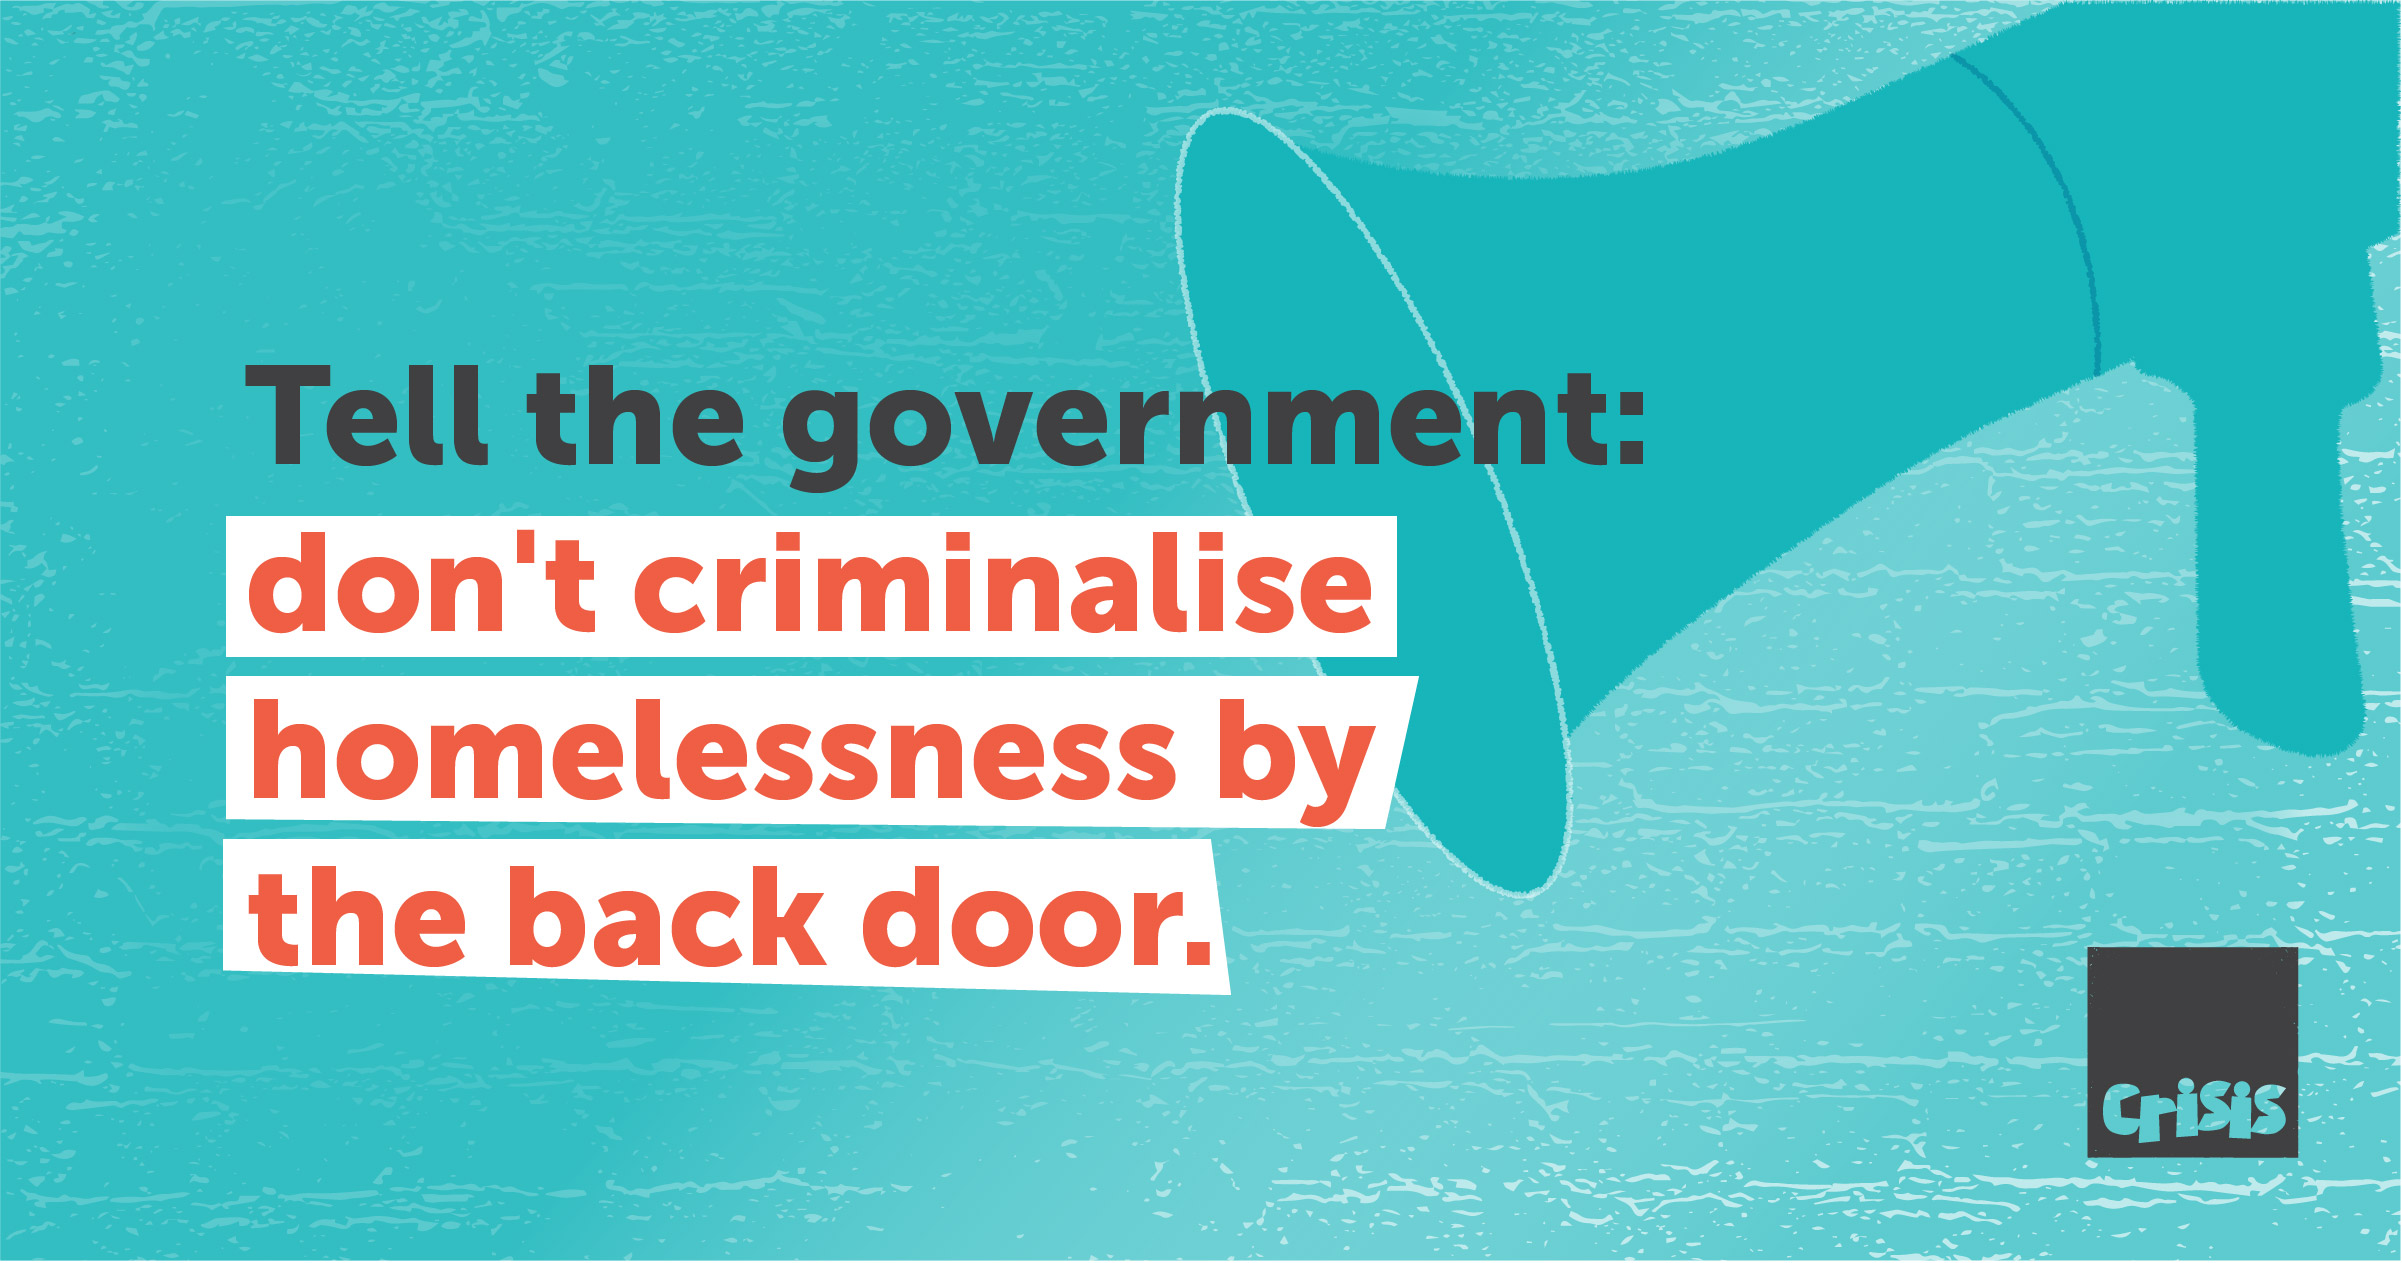 An image of a megaphone with the text: Tell the government: don't criminalise homelessness by the back door